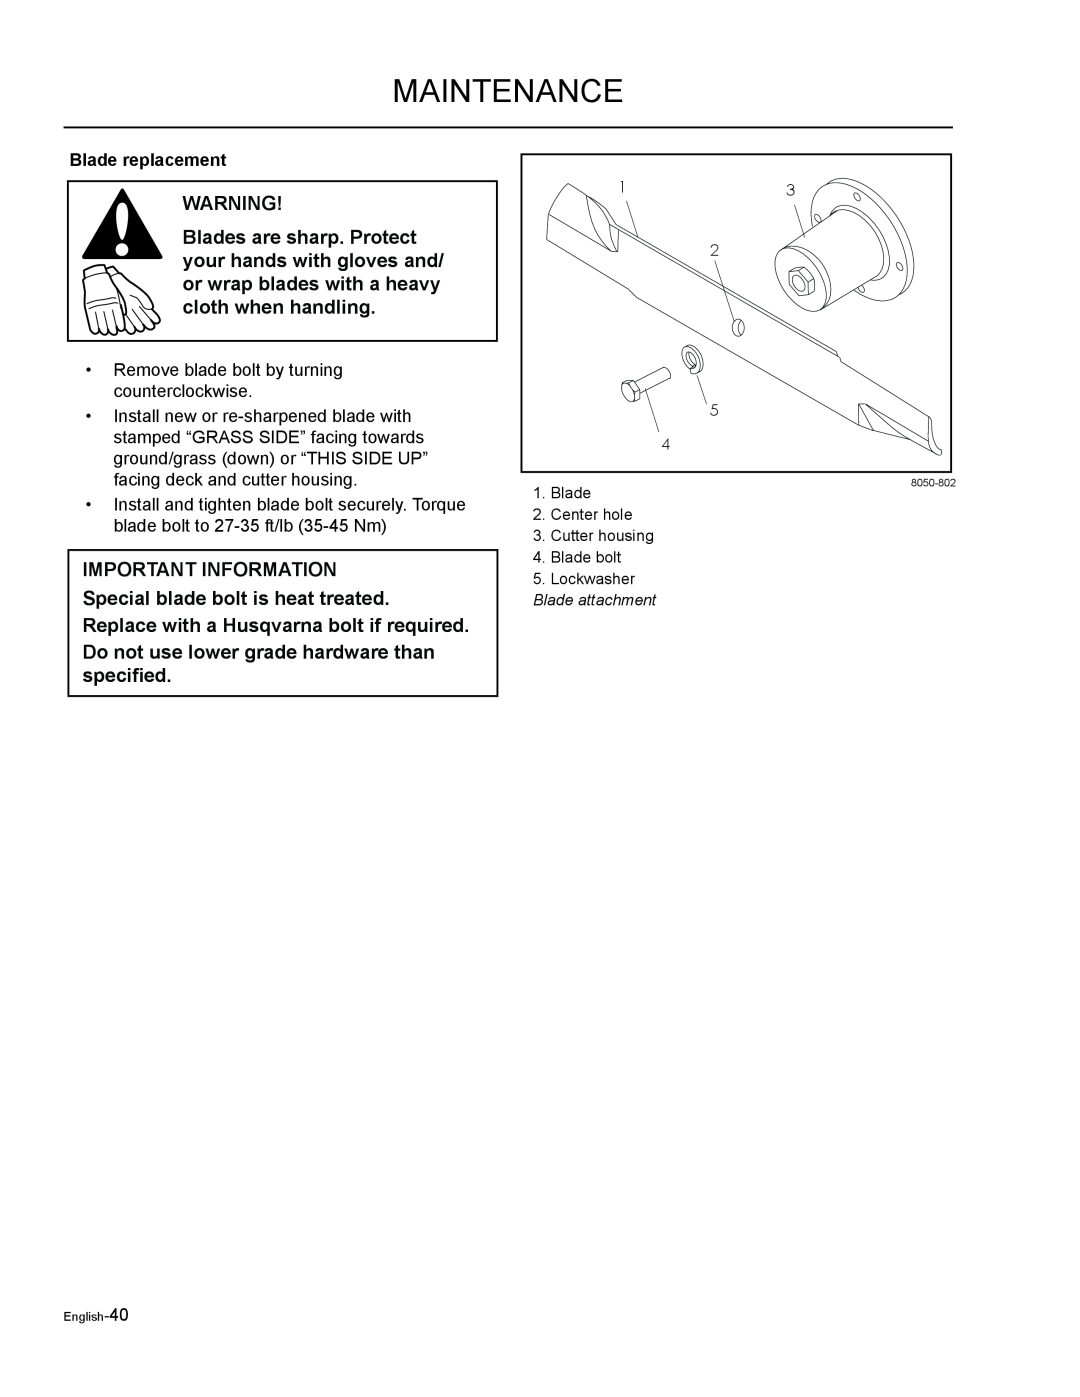 Husqvarna EZF 3417/ 965879301 manual Do not use lower grade hardware than specified, Maintenance, Blade replacement 